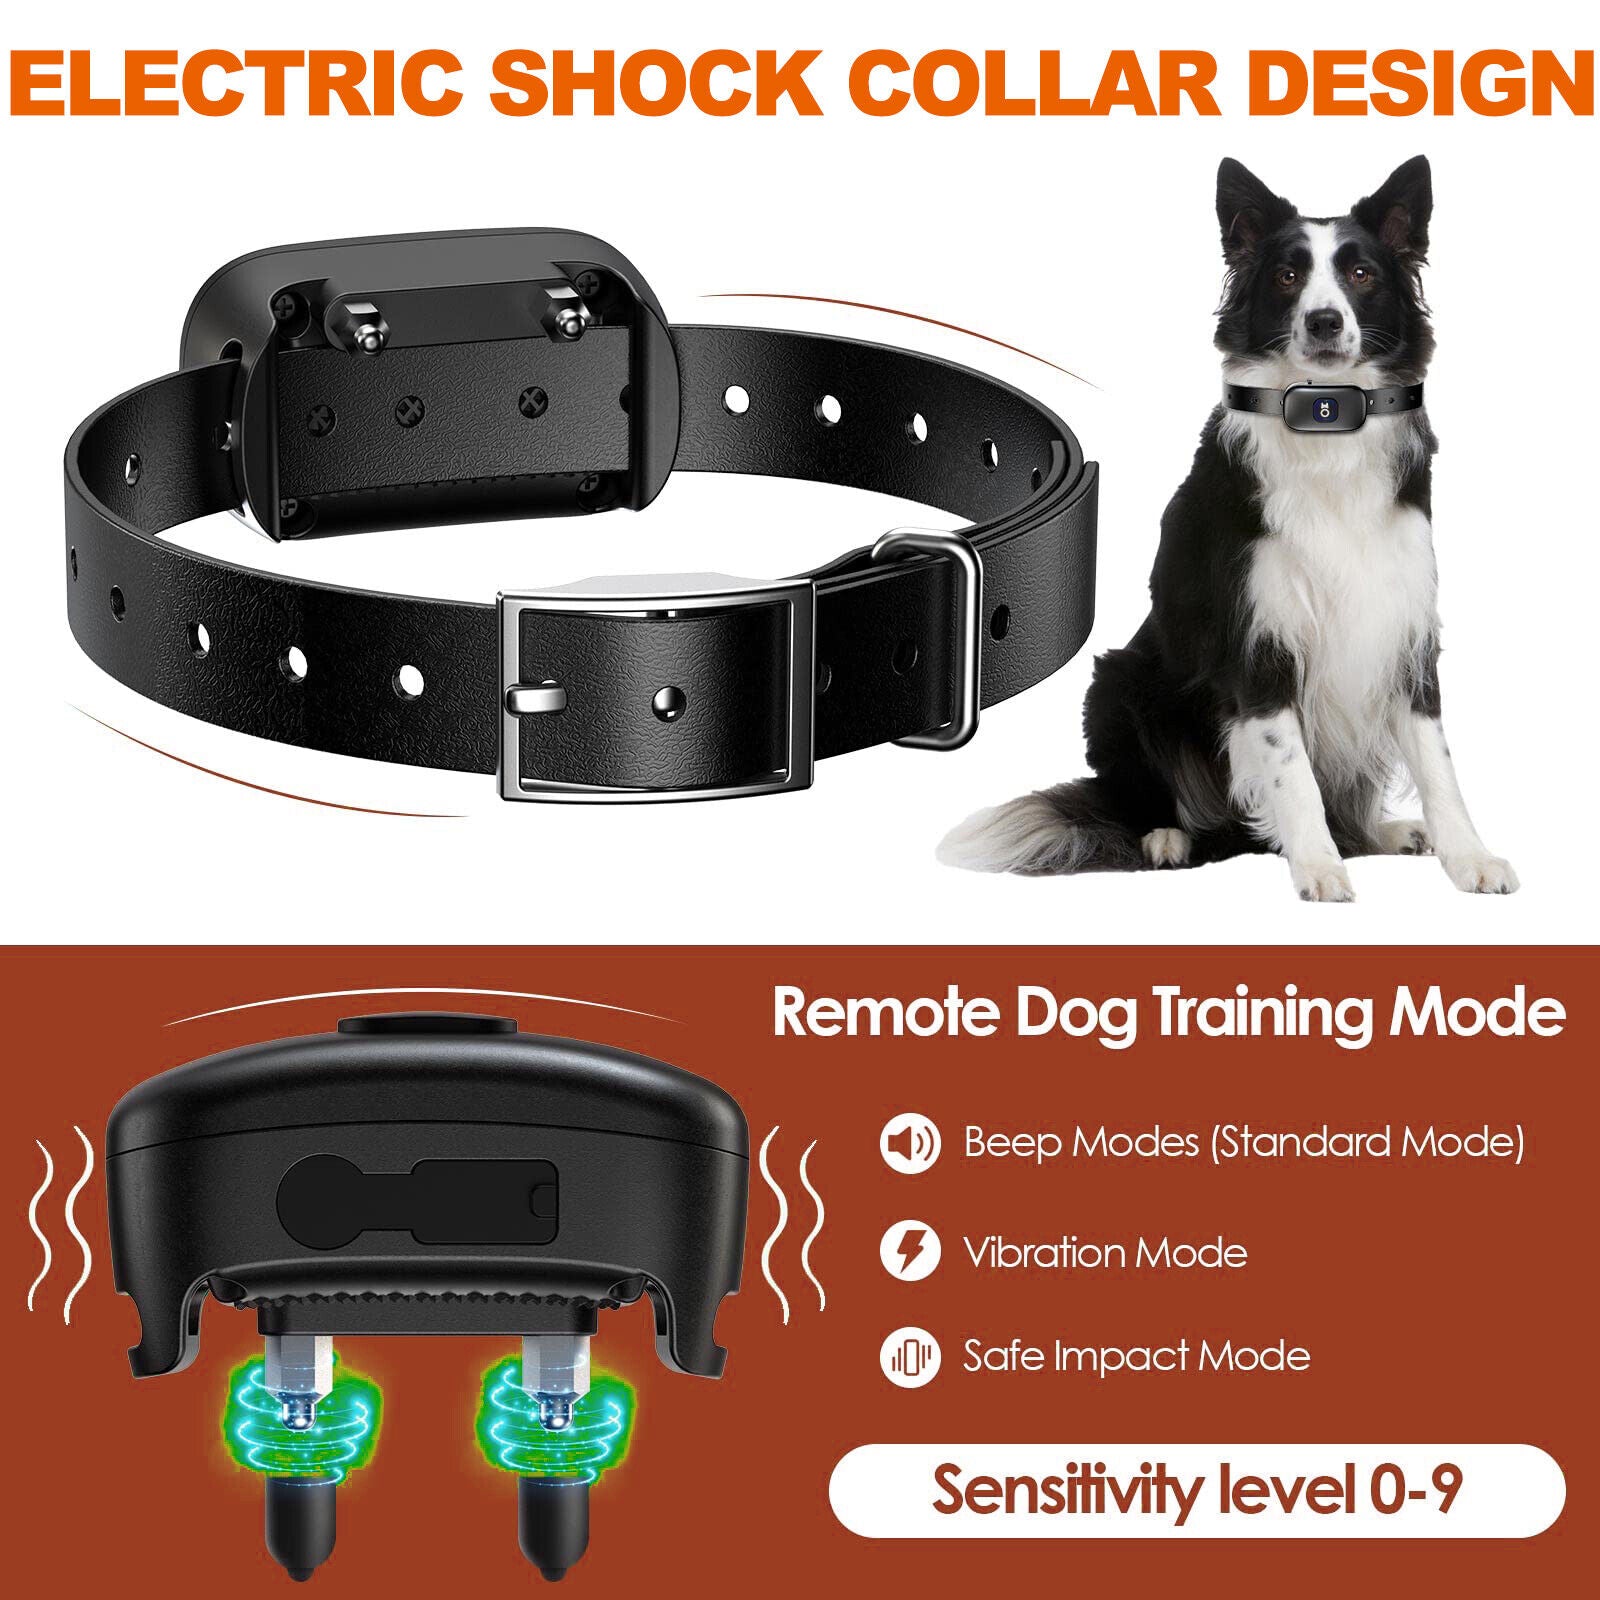 2 In 1 Rechargeable Waterproof Wireless Dog Fence, Remote Training Collar